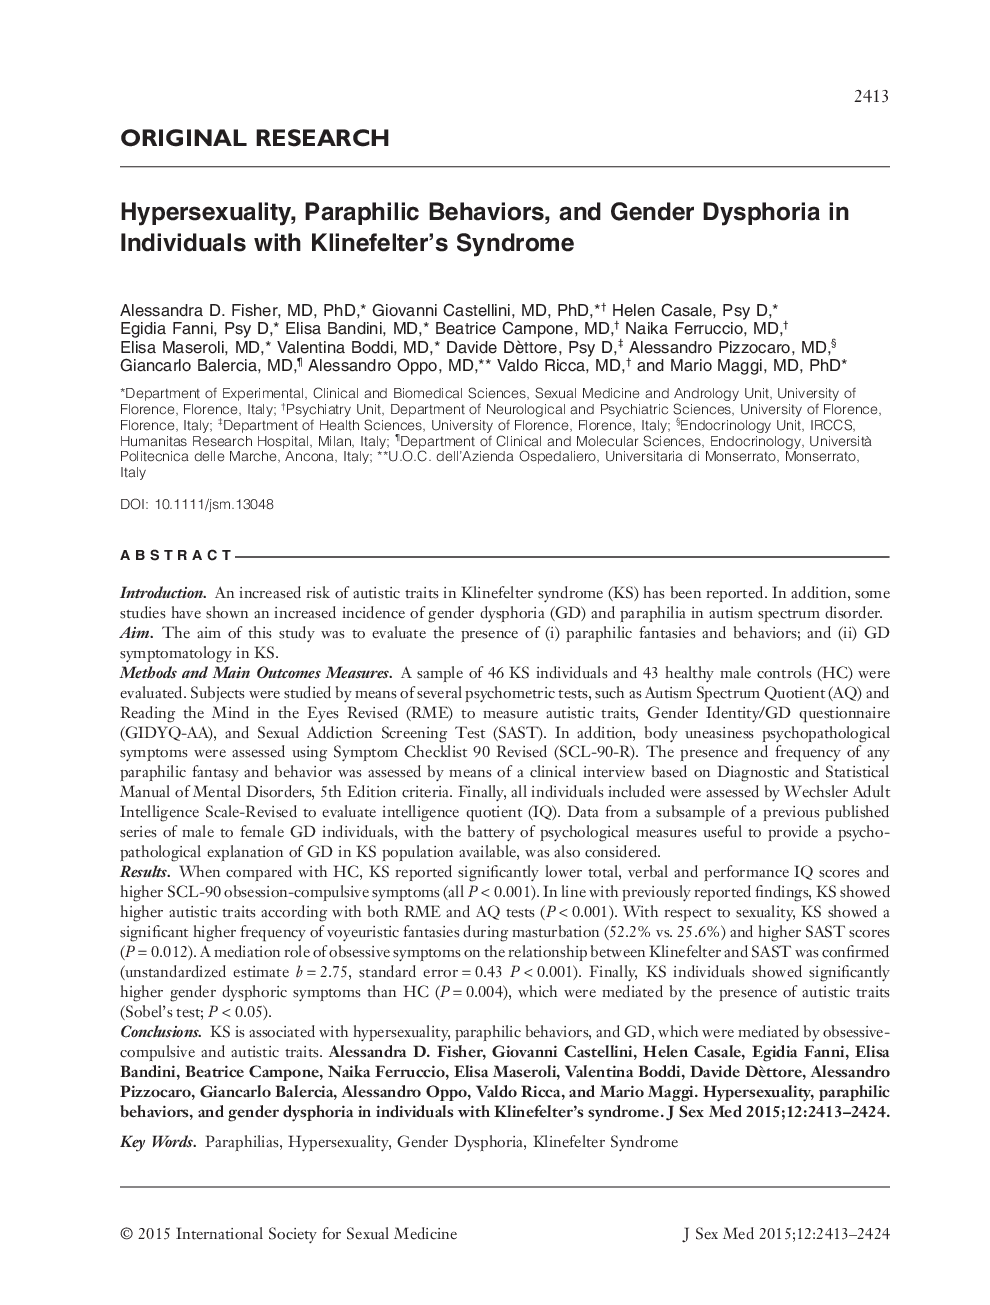 Hypersexuality, Paraphilic Behaviors, and Gender Dysphoria in Individuals with Klinefelter's Syndrome